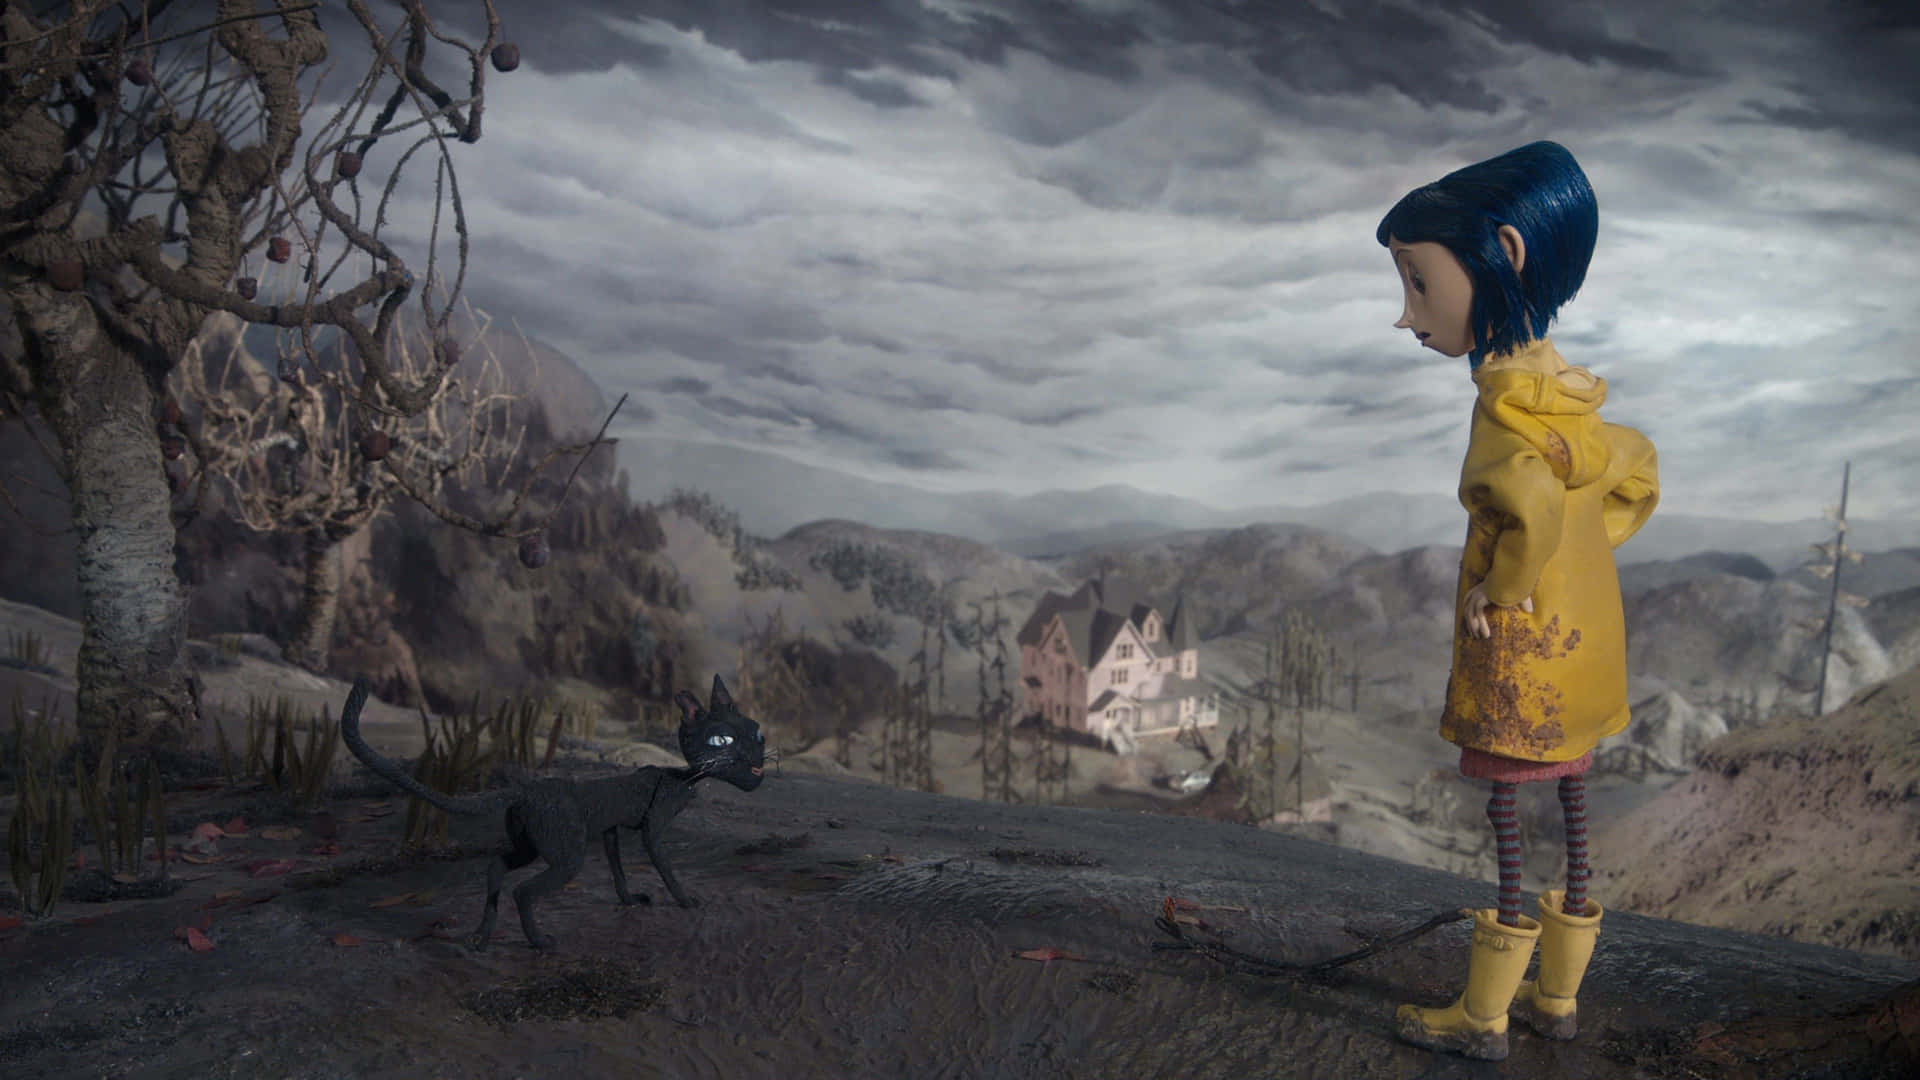 Join Coraline on her wild and mysterious journey.